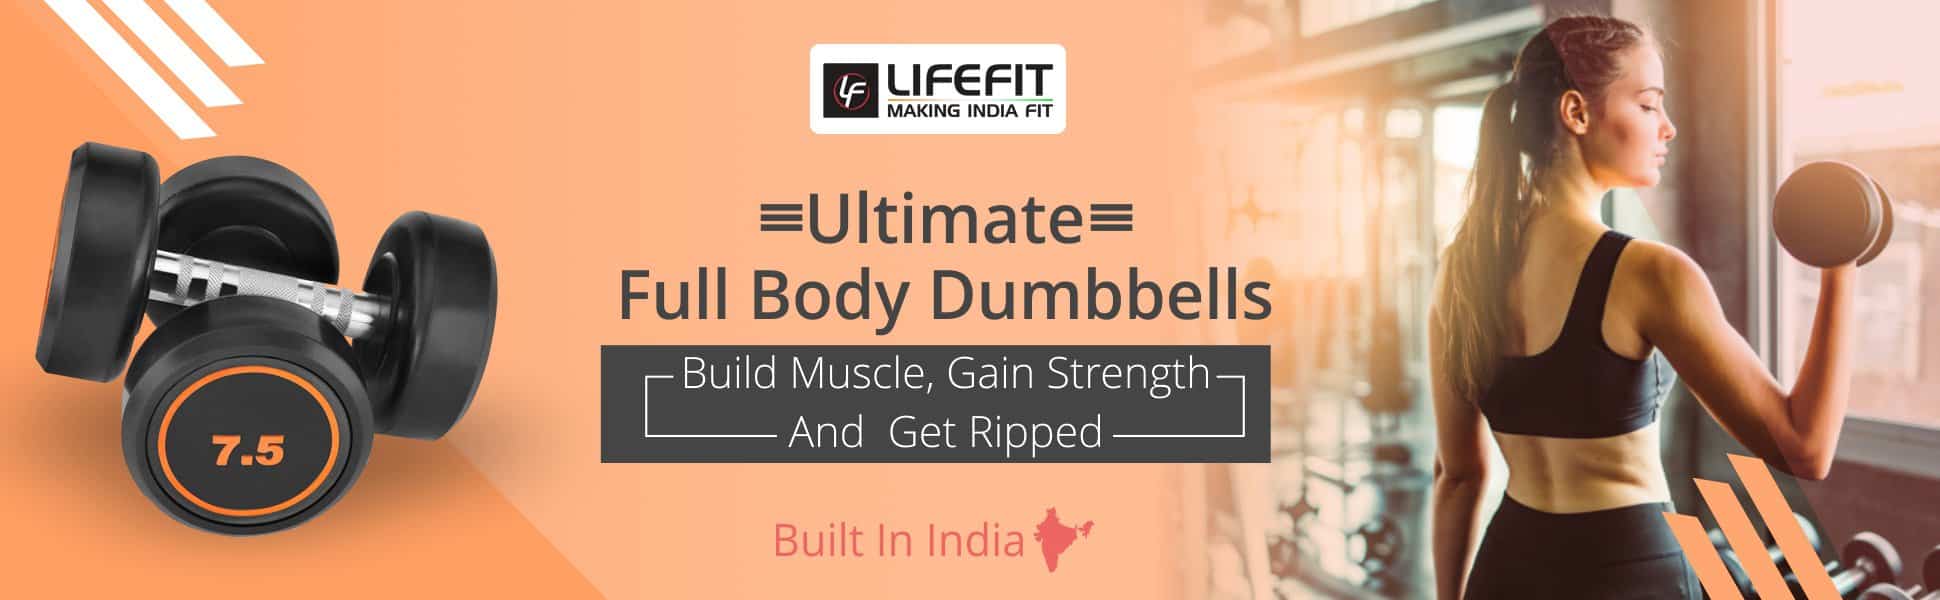 Life Fit Bouncer Dumbbell